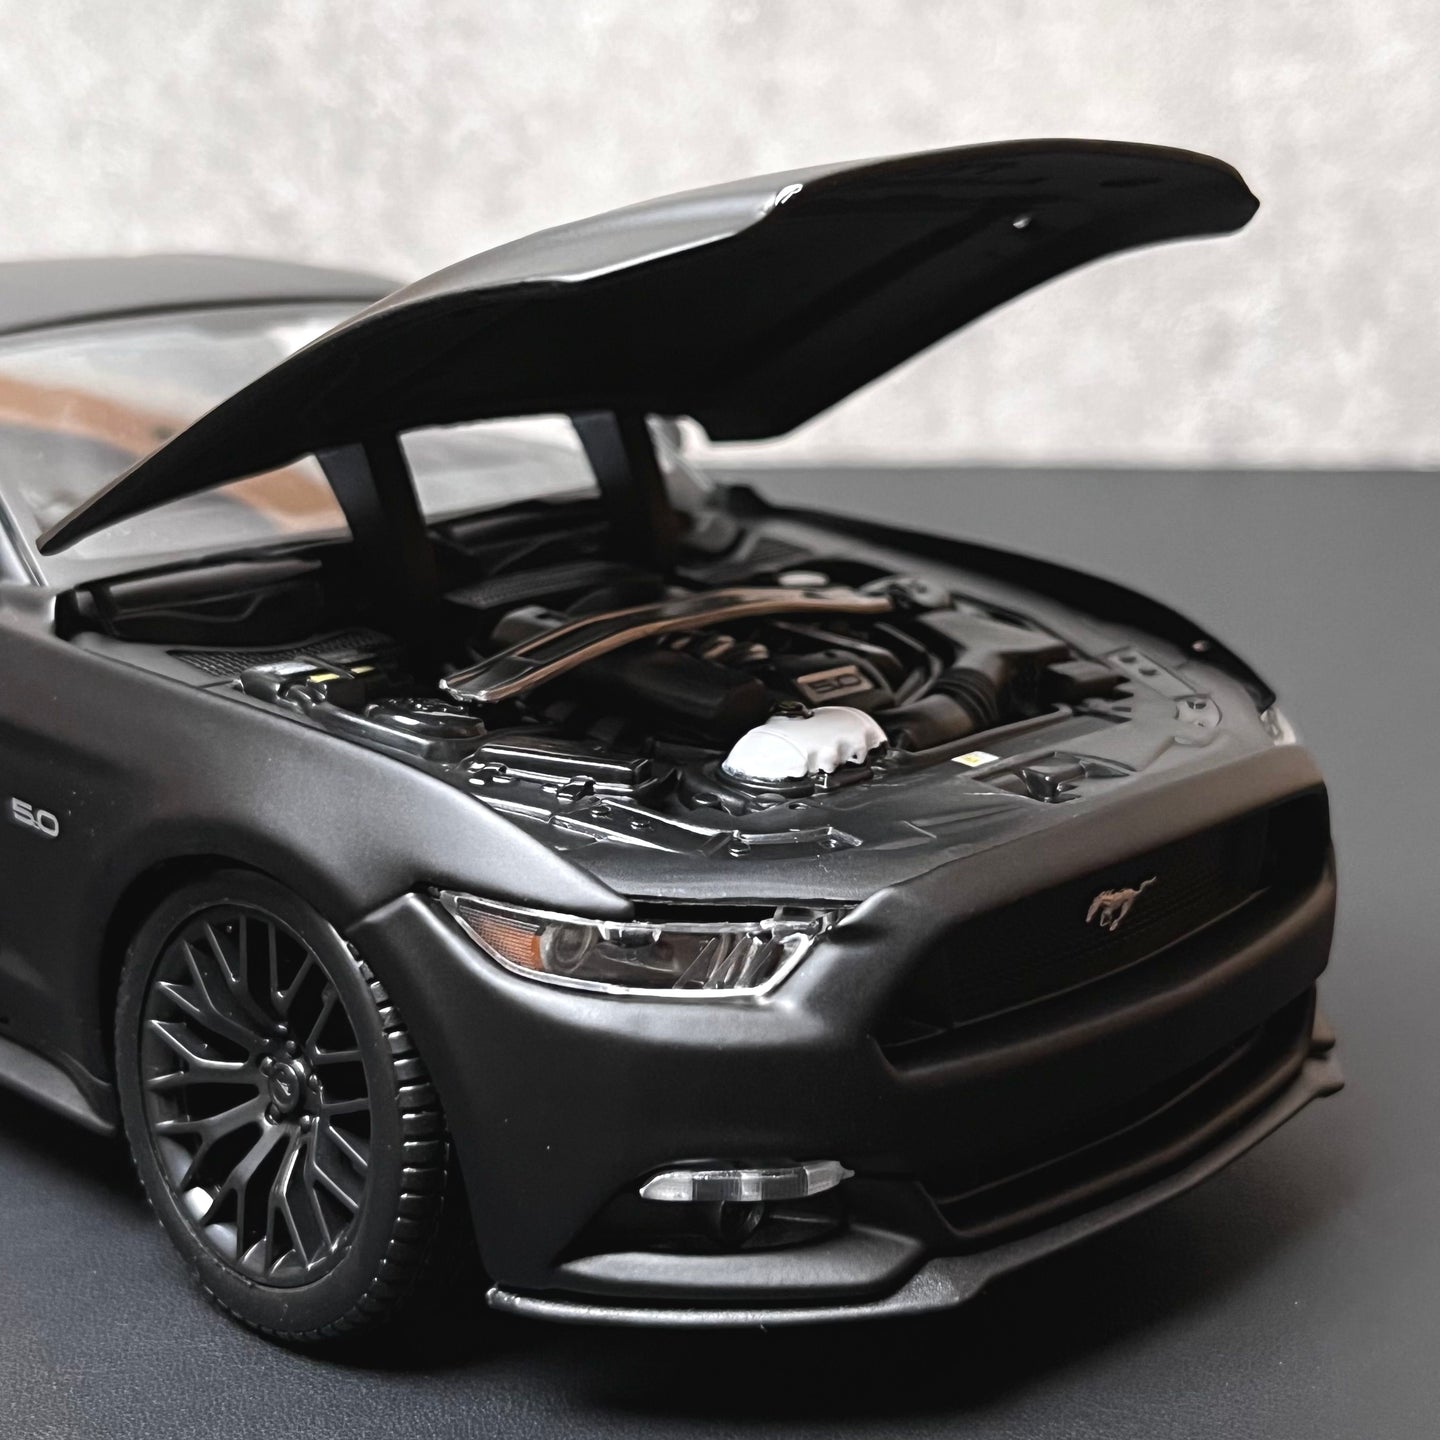 2015 Ford Mustang GT Matte Black Diecast Car Model 1:18 By Maisto